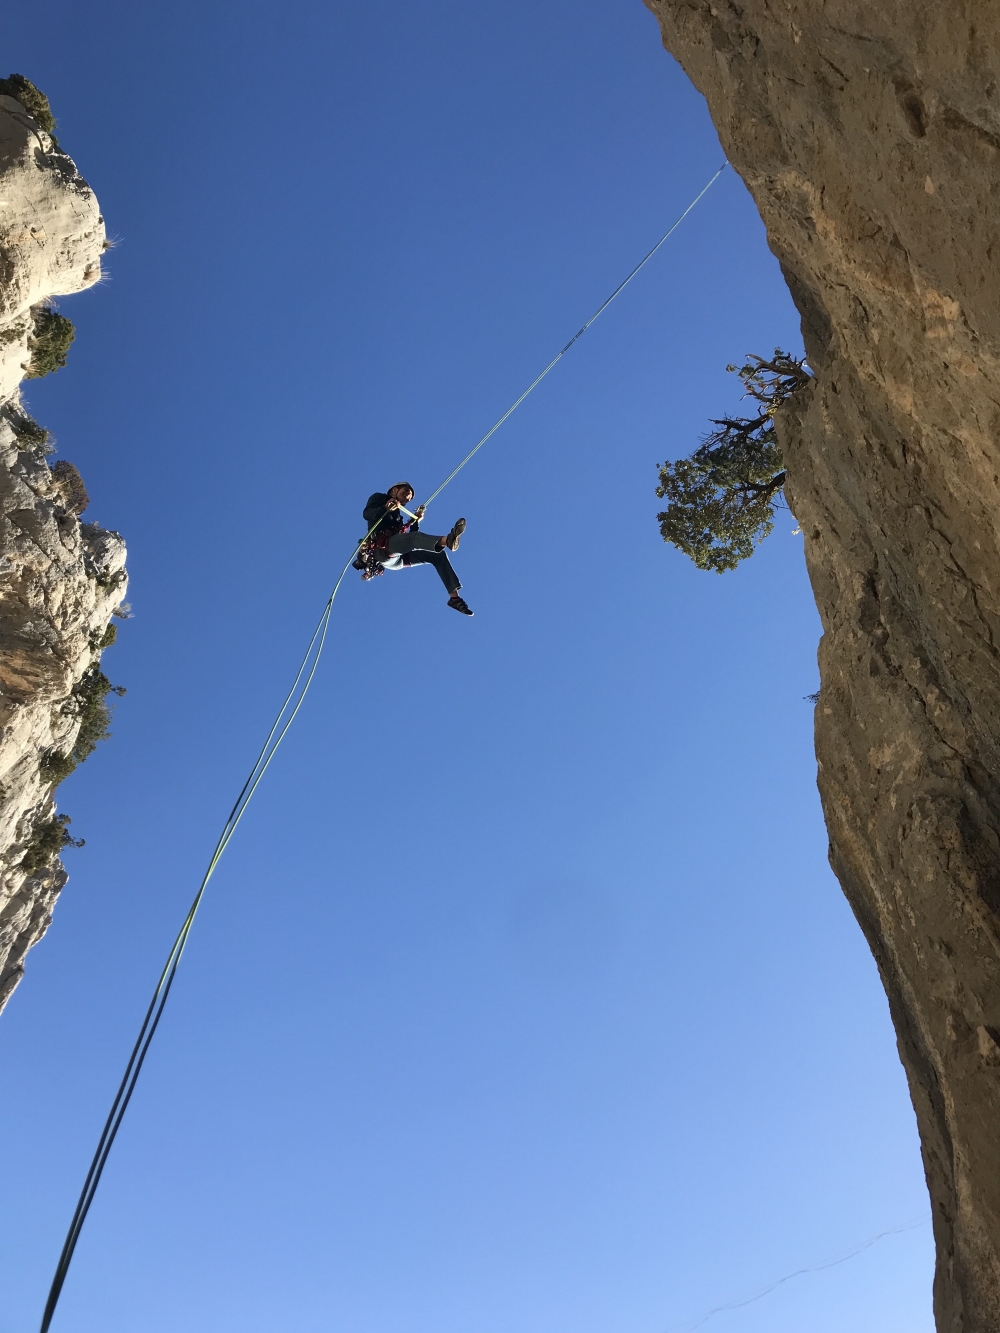 Rappeling down at the Verdon Gorge.